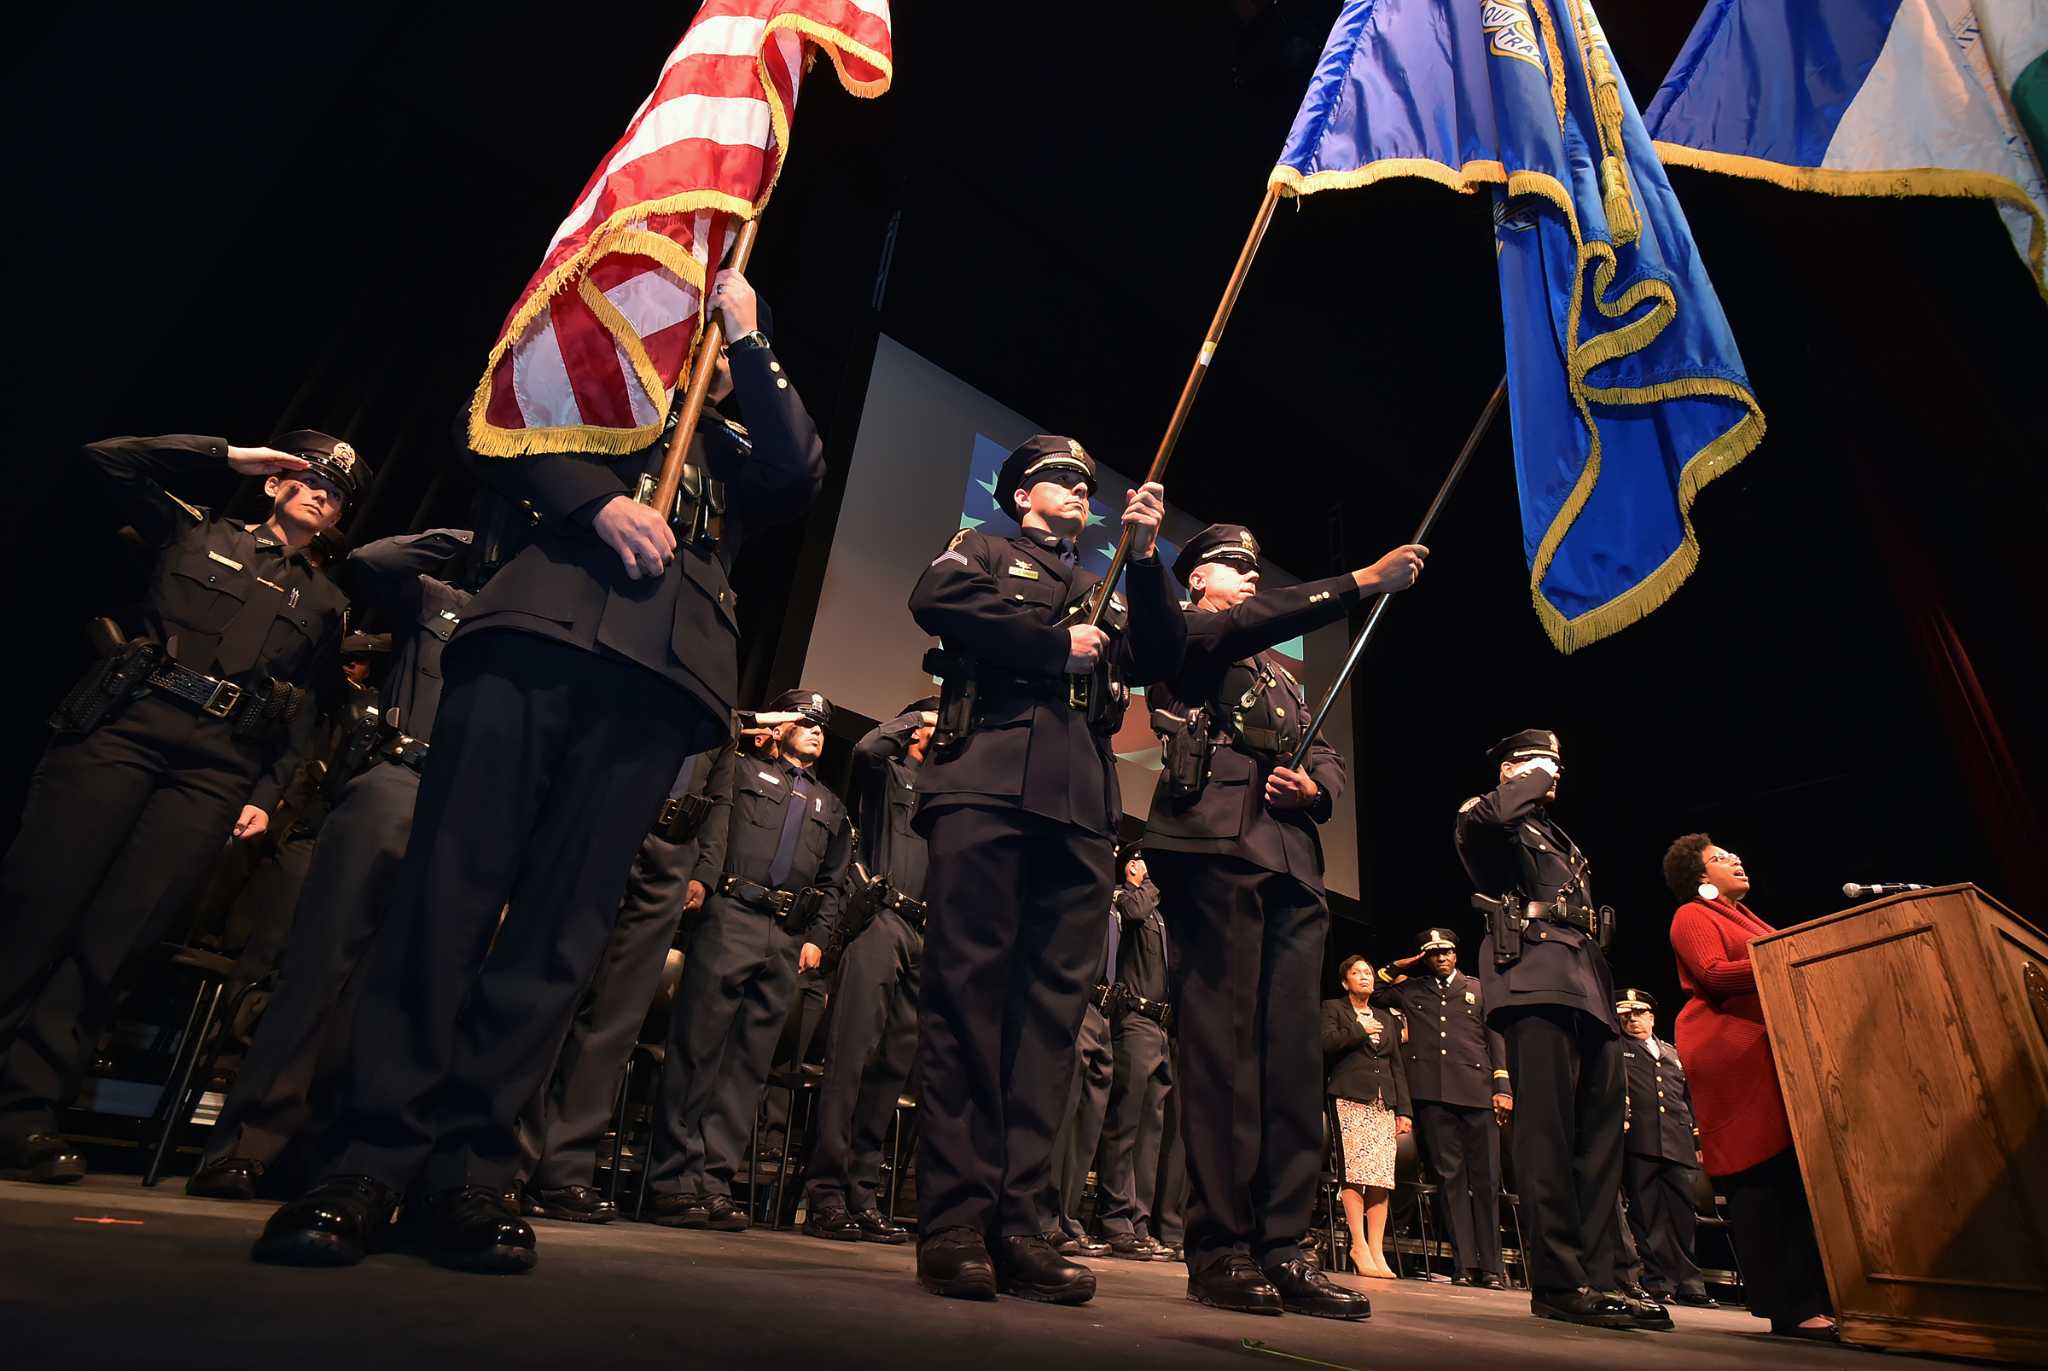 PHOTOS: New Haven Police Academy 22nd Class Graduation